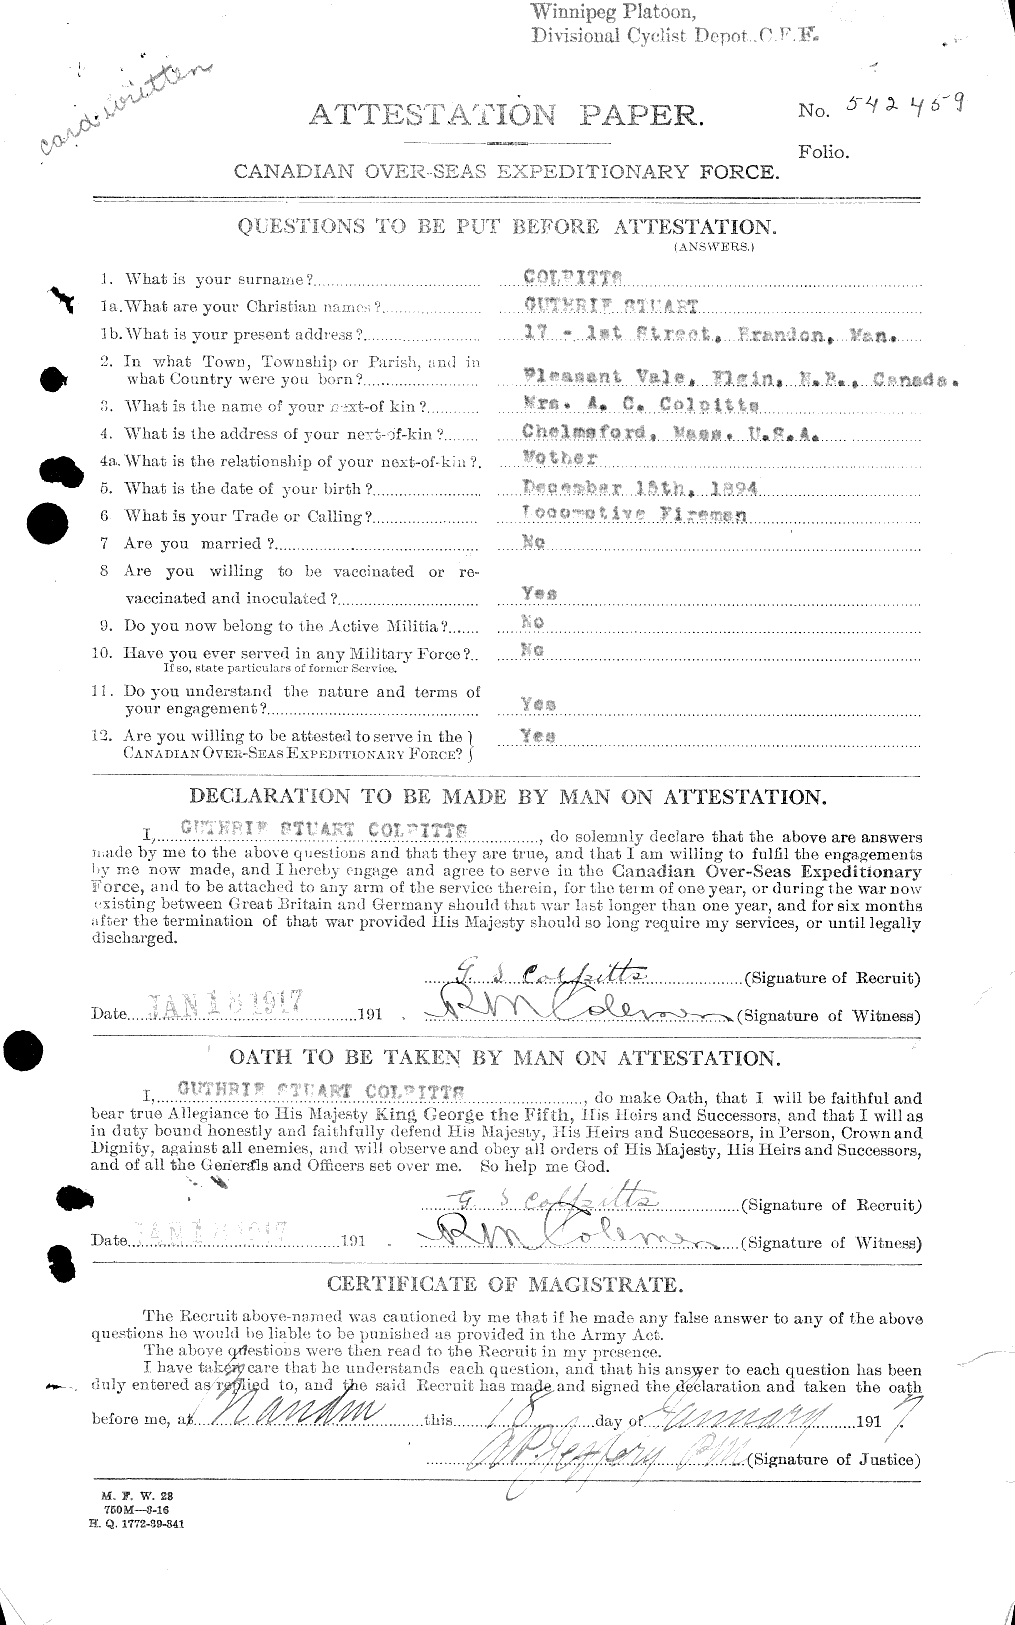 Personnel Records of the First World War - CEF 040815a